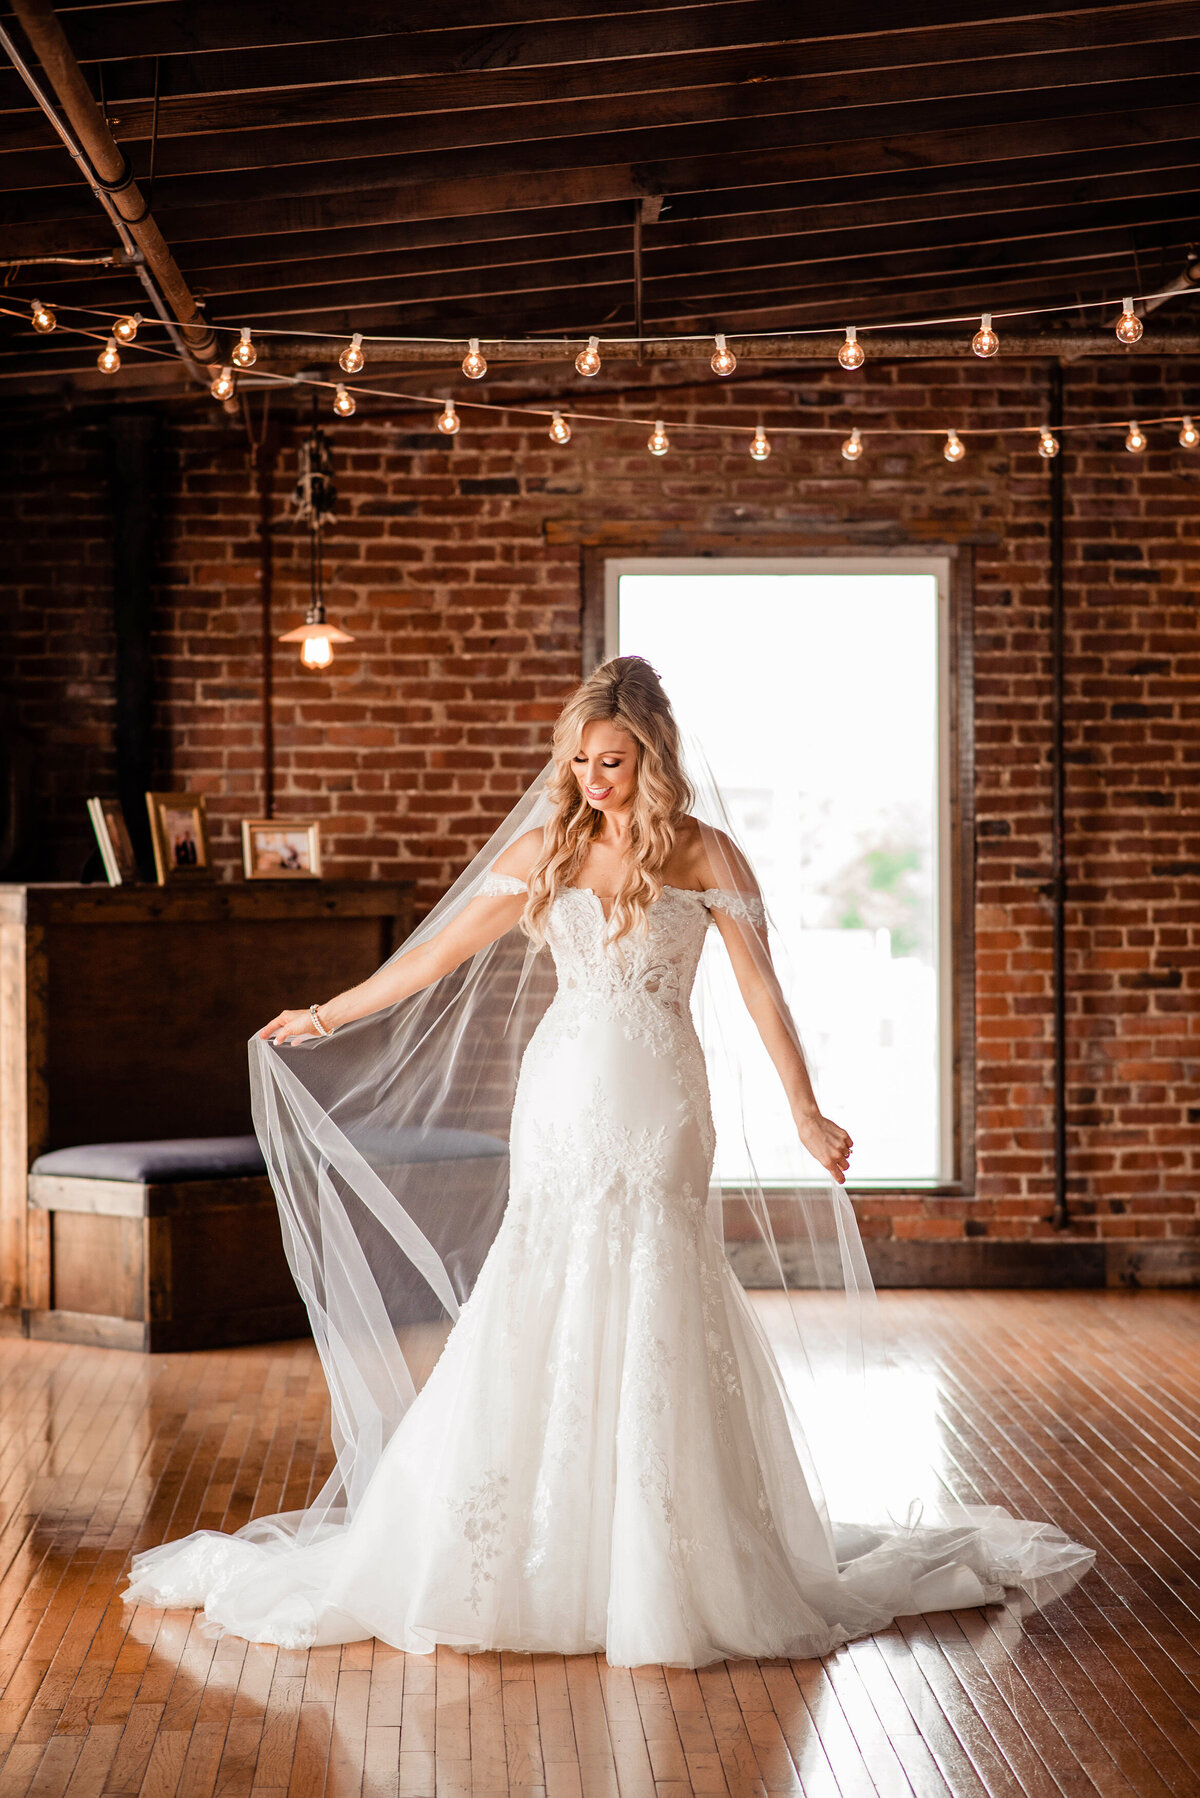 Bride playing with her cathedral veil inside wedding venue with brick walls and string lights